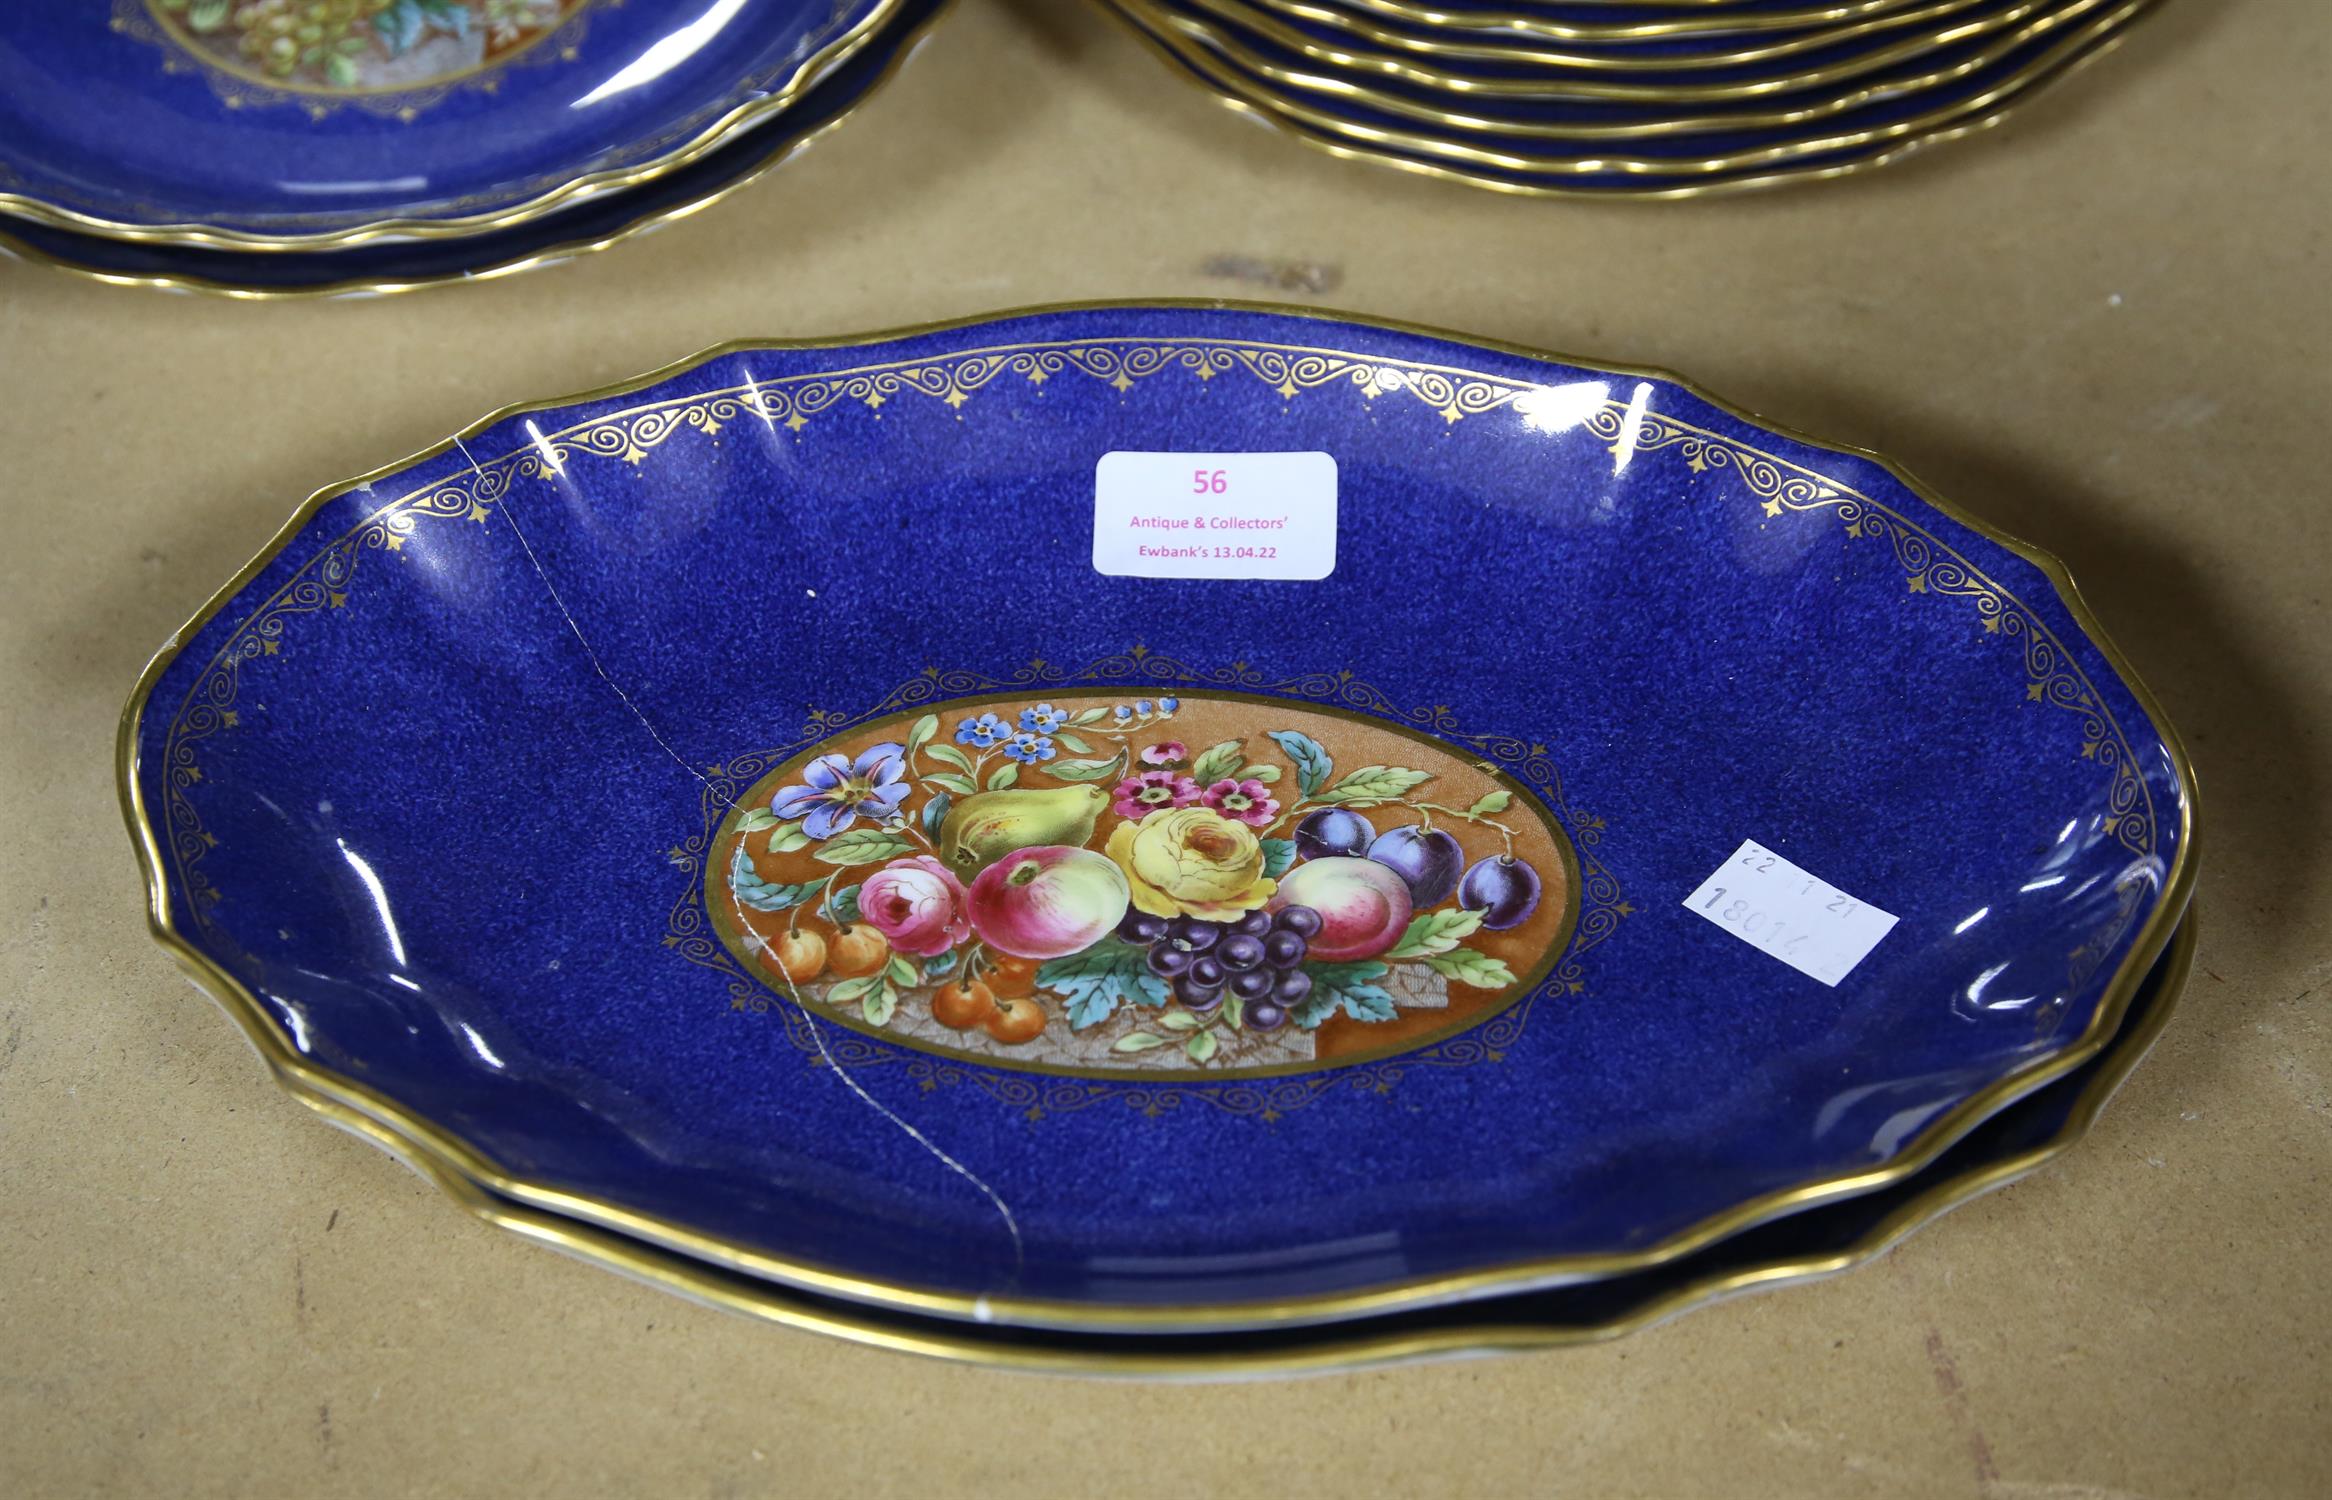 Ten Copeland Spode side plates, two oval dishes, and two round dishes, all with floral and fruit - Image 2 of 2